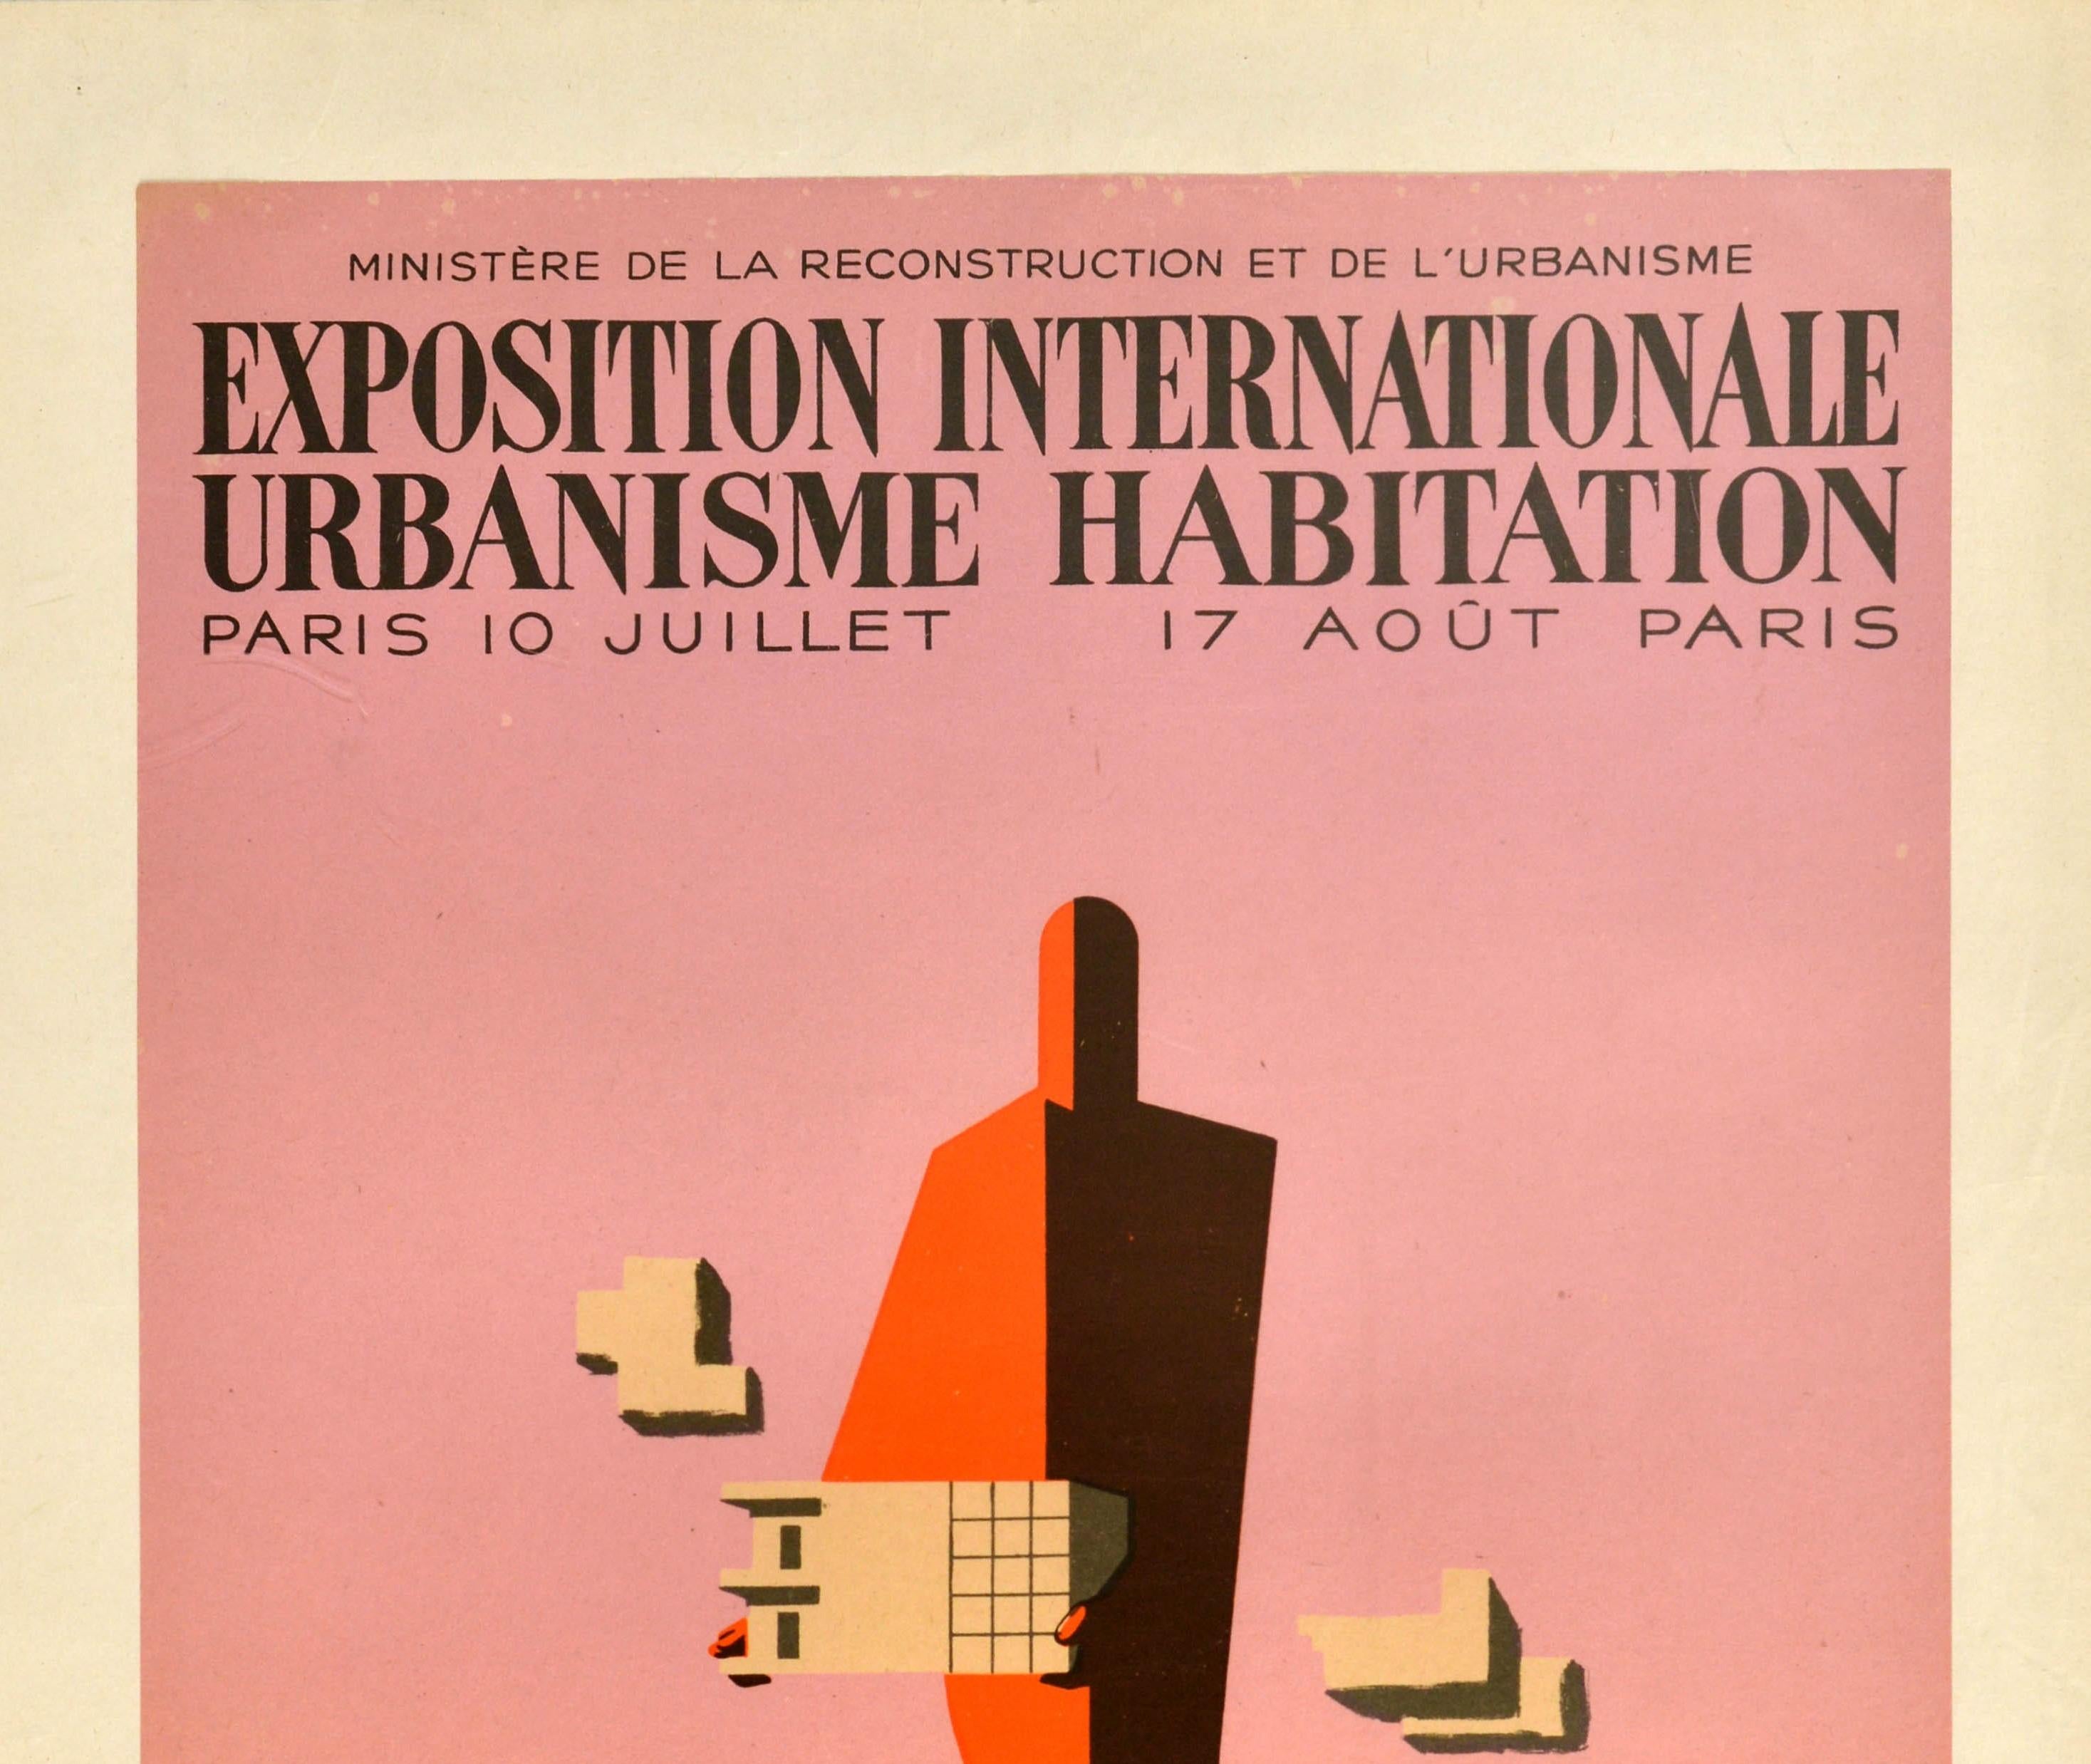 Original vintage advertising poster for the International Exhibition of Urban Housing organised by the Ministry of Reconstruction and Urbanism and held in Paris from 10 July to 17 August 1947 at the Grand Palais and Court of the Queen / Ministere de